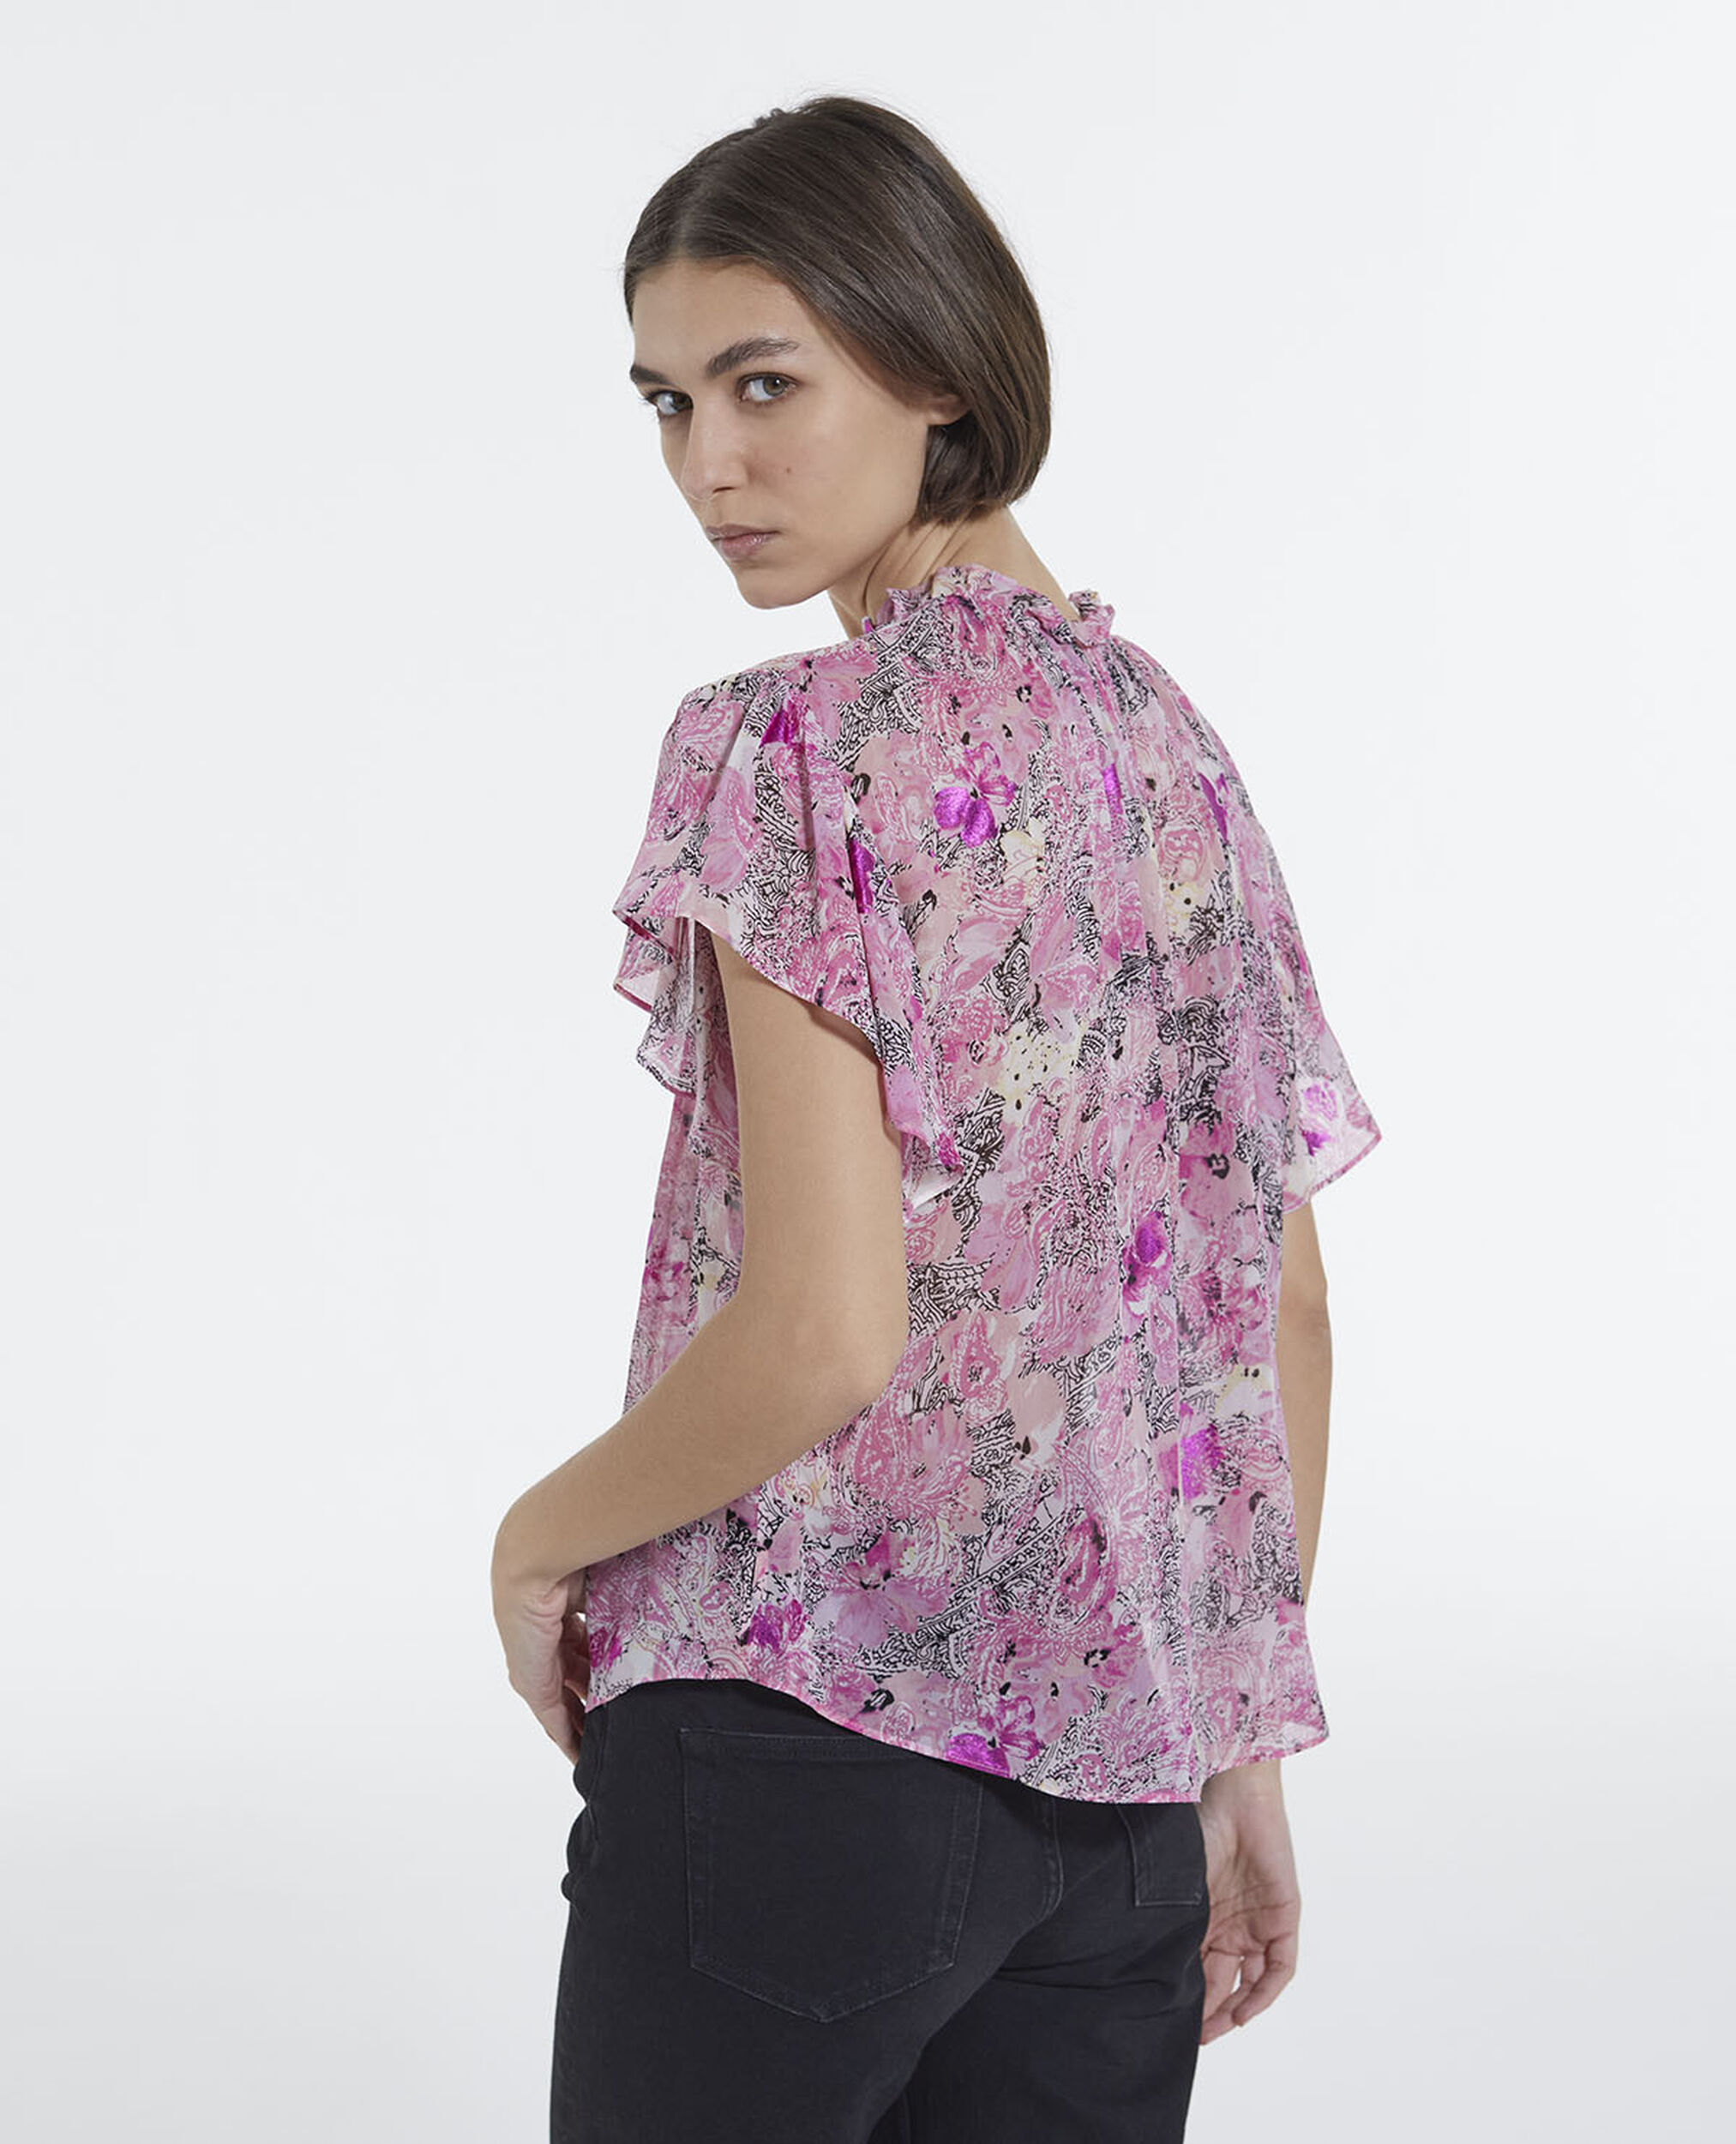 Flowing frilly pink top with floral print, PINK, hi-res image number null